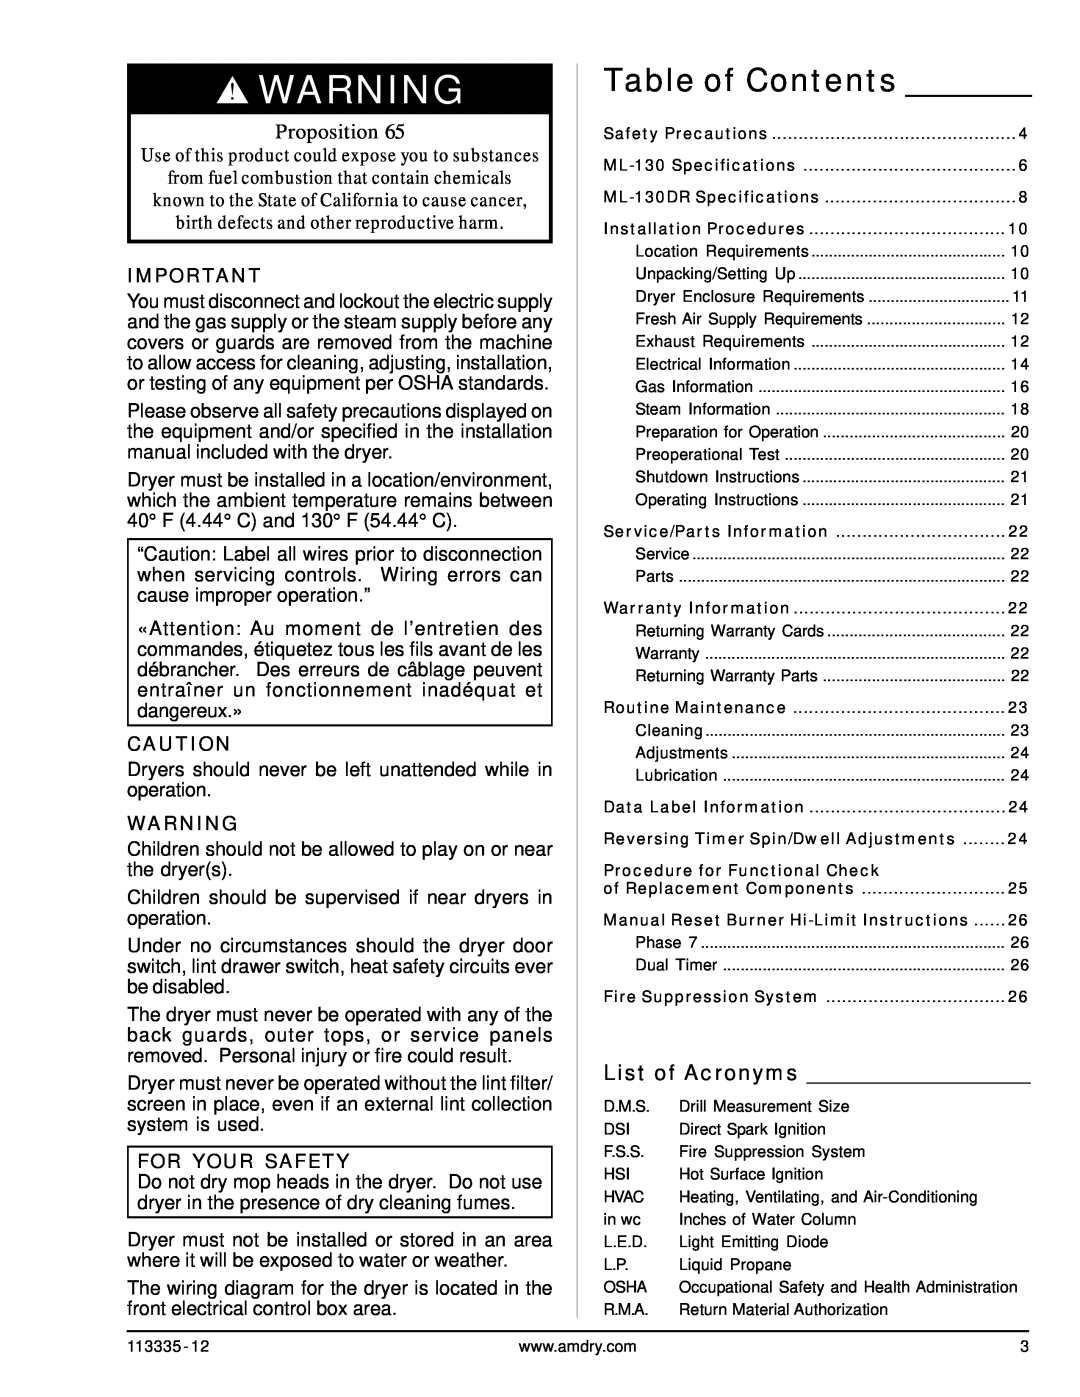 American Dryer Corp ML-130DR, ML-130 III List of Acronyms, Table of Contents, Proposition, For Your Safety 